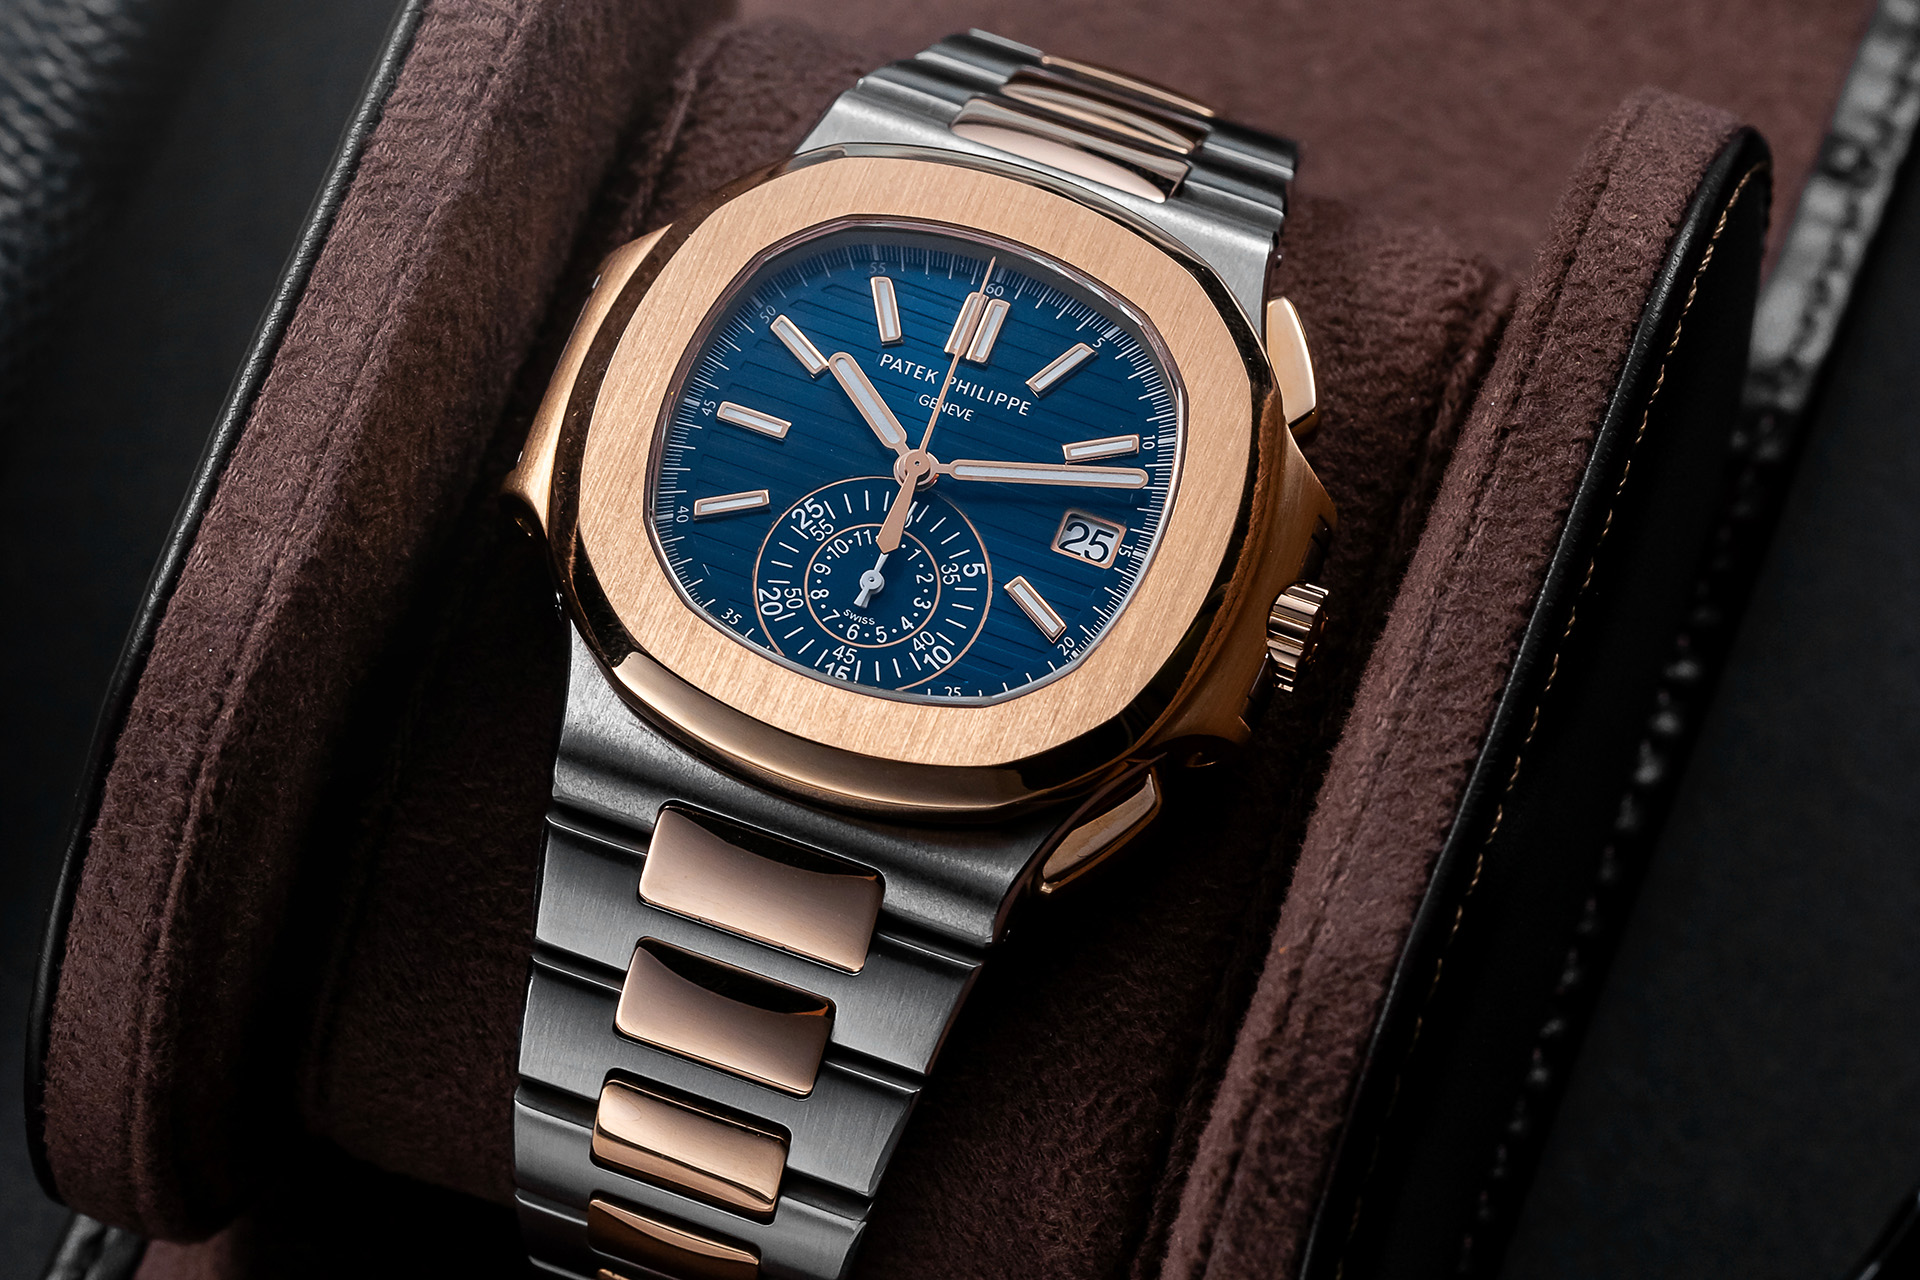 The Most Prestigious Sports Watch in the World: The Patek Philippe